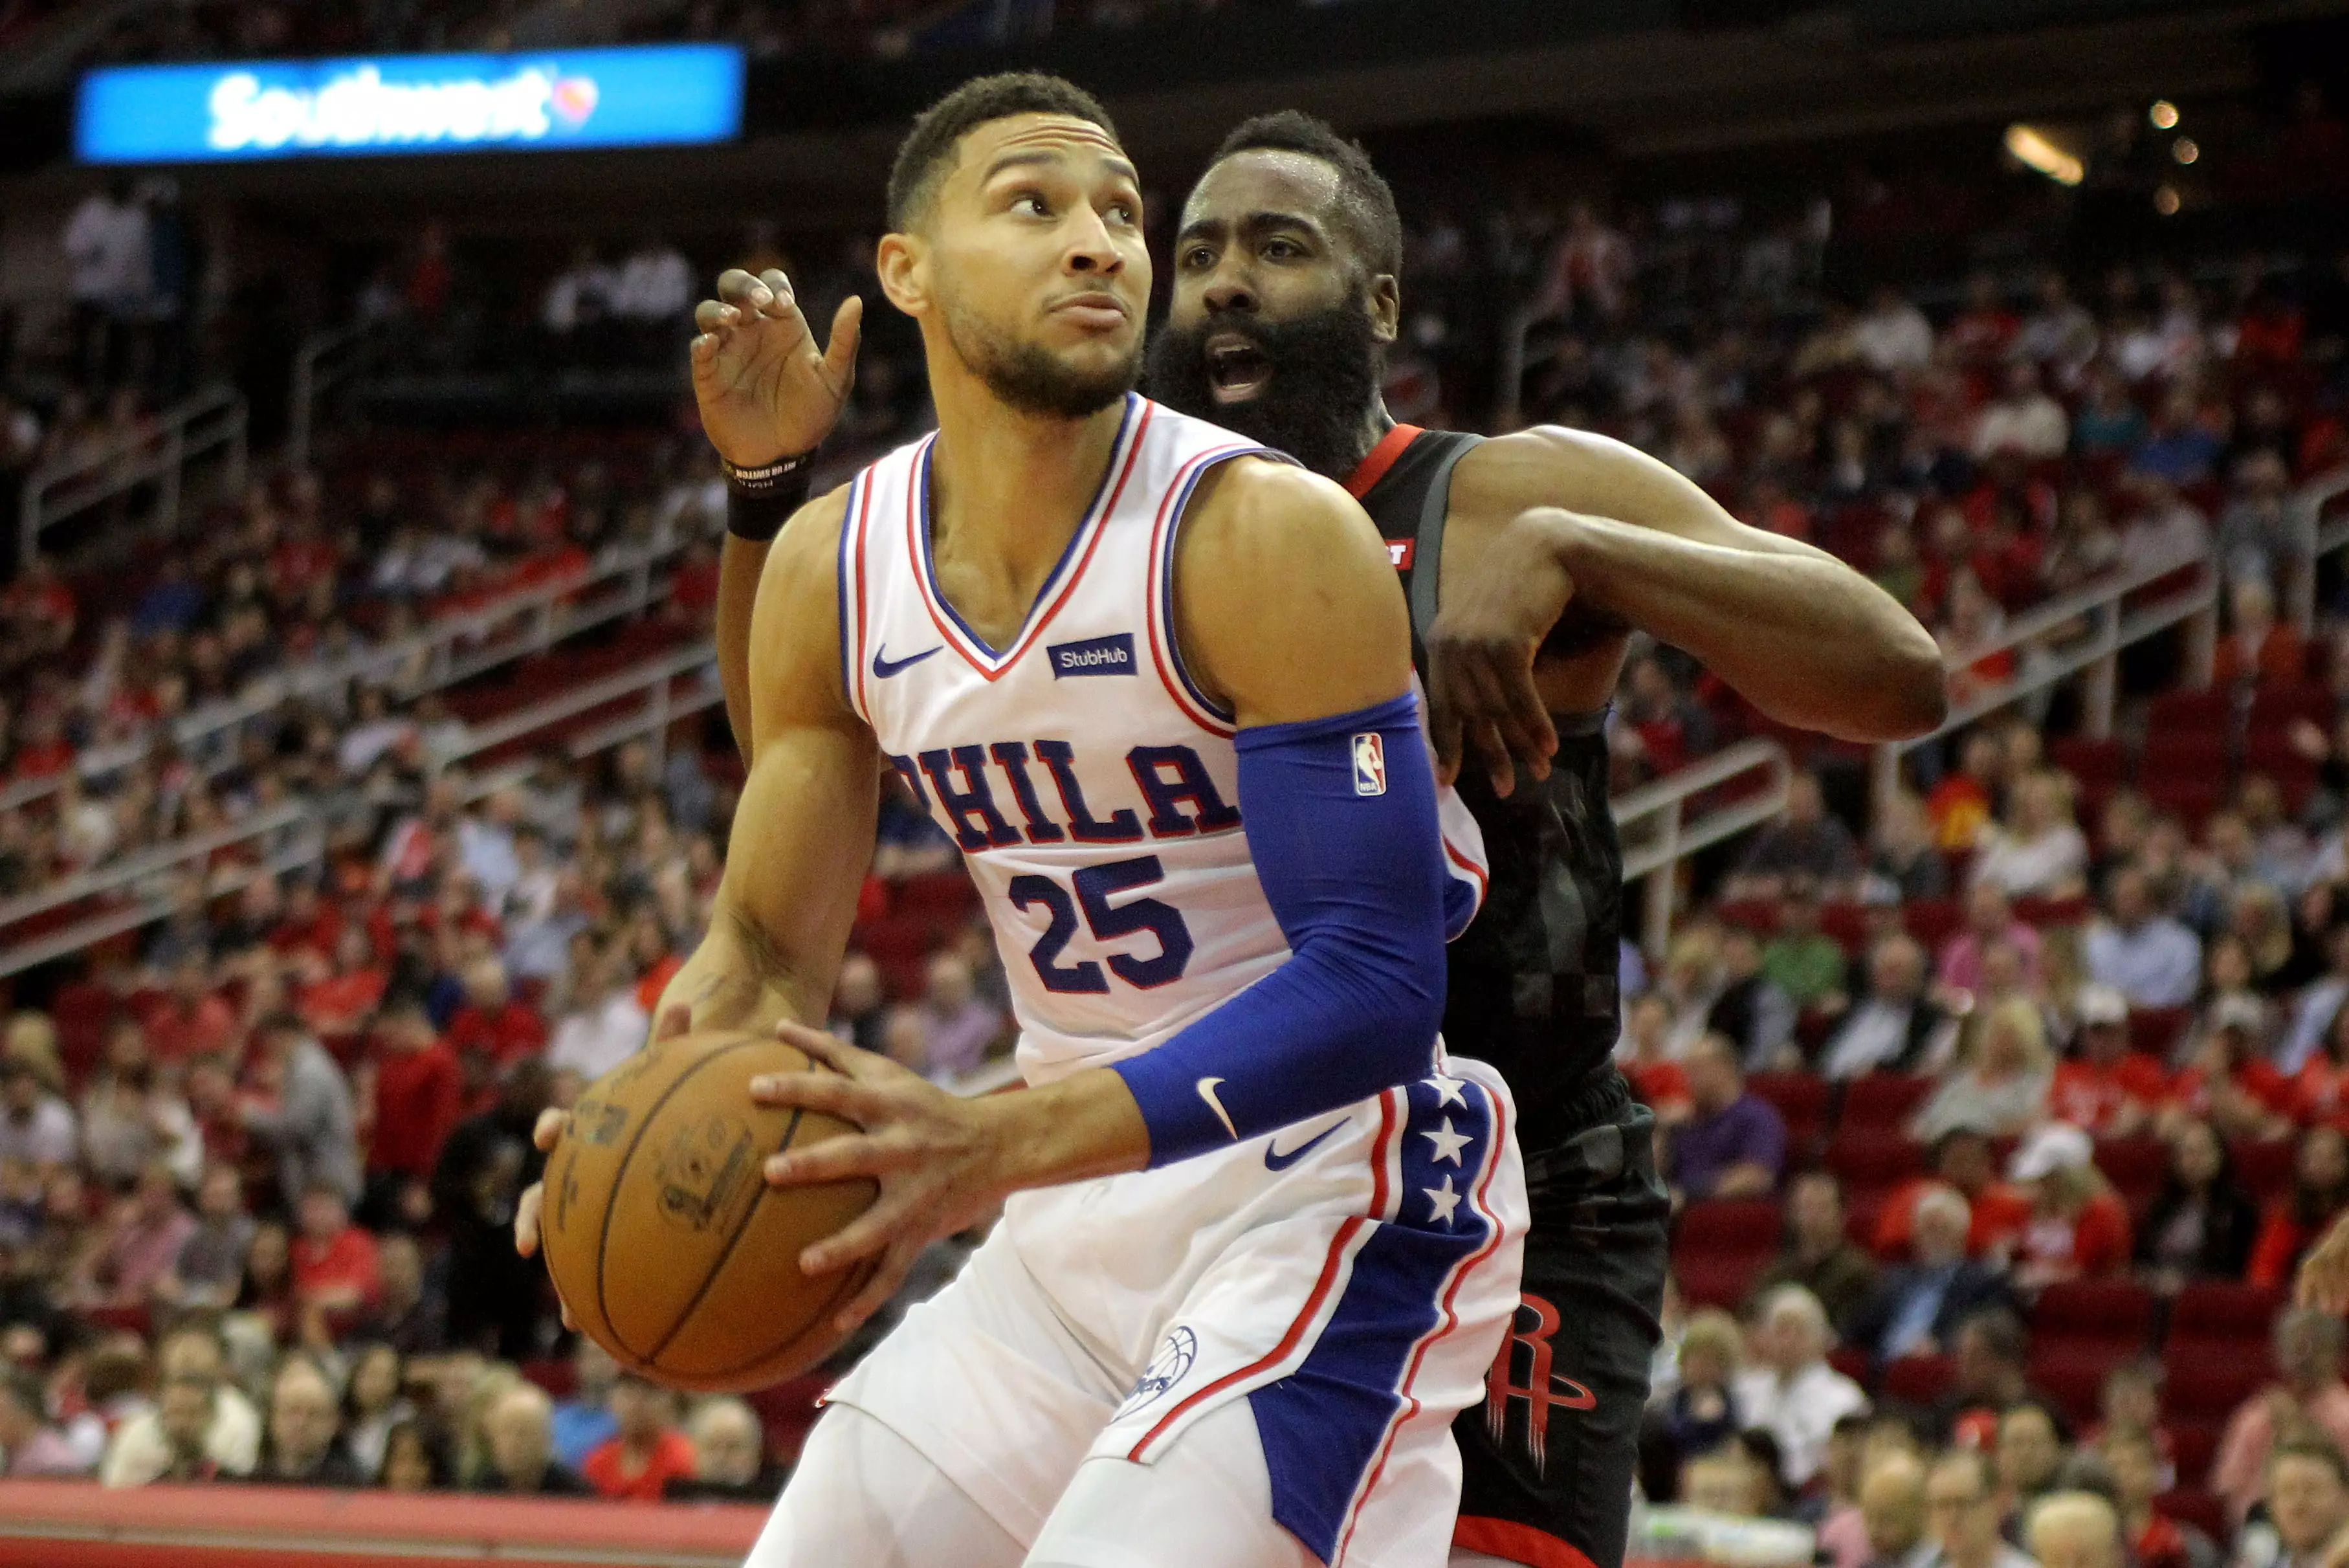 Simmons could be used in the trade.